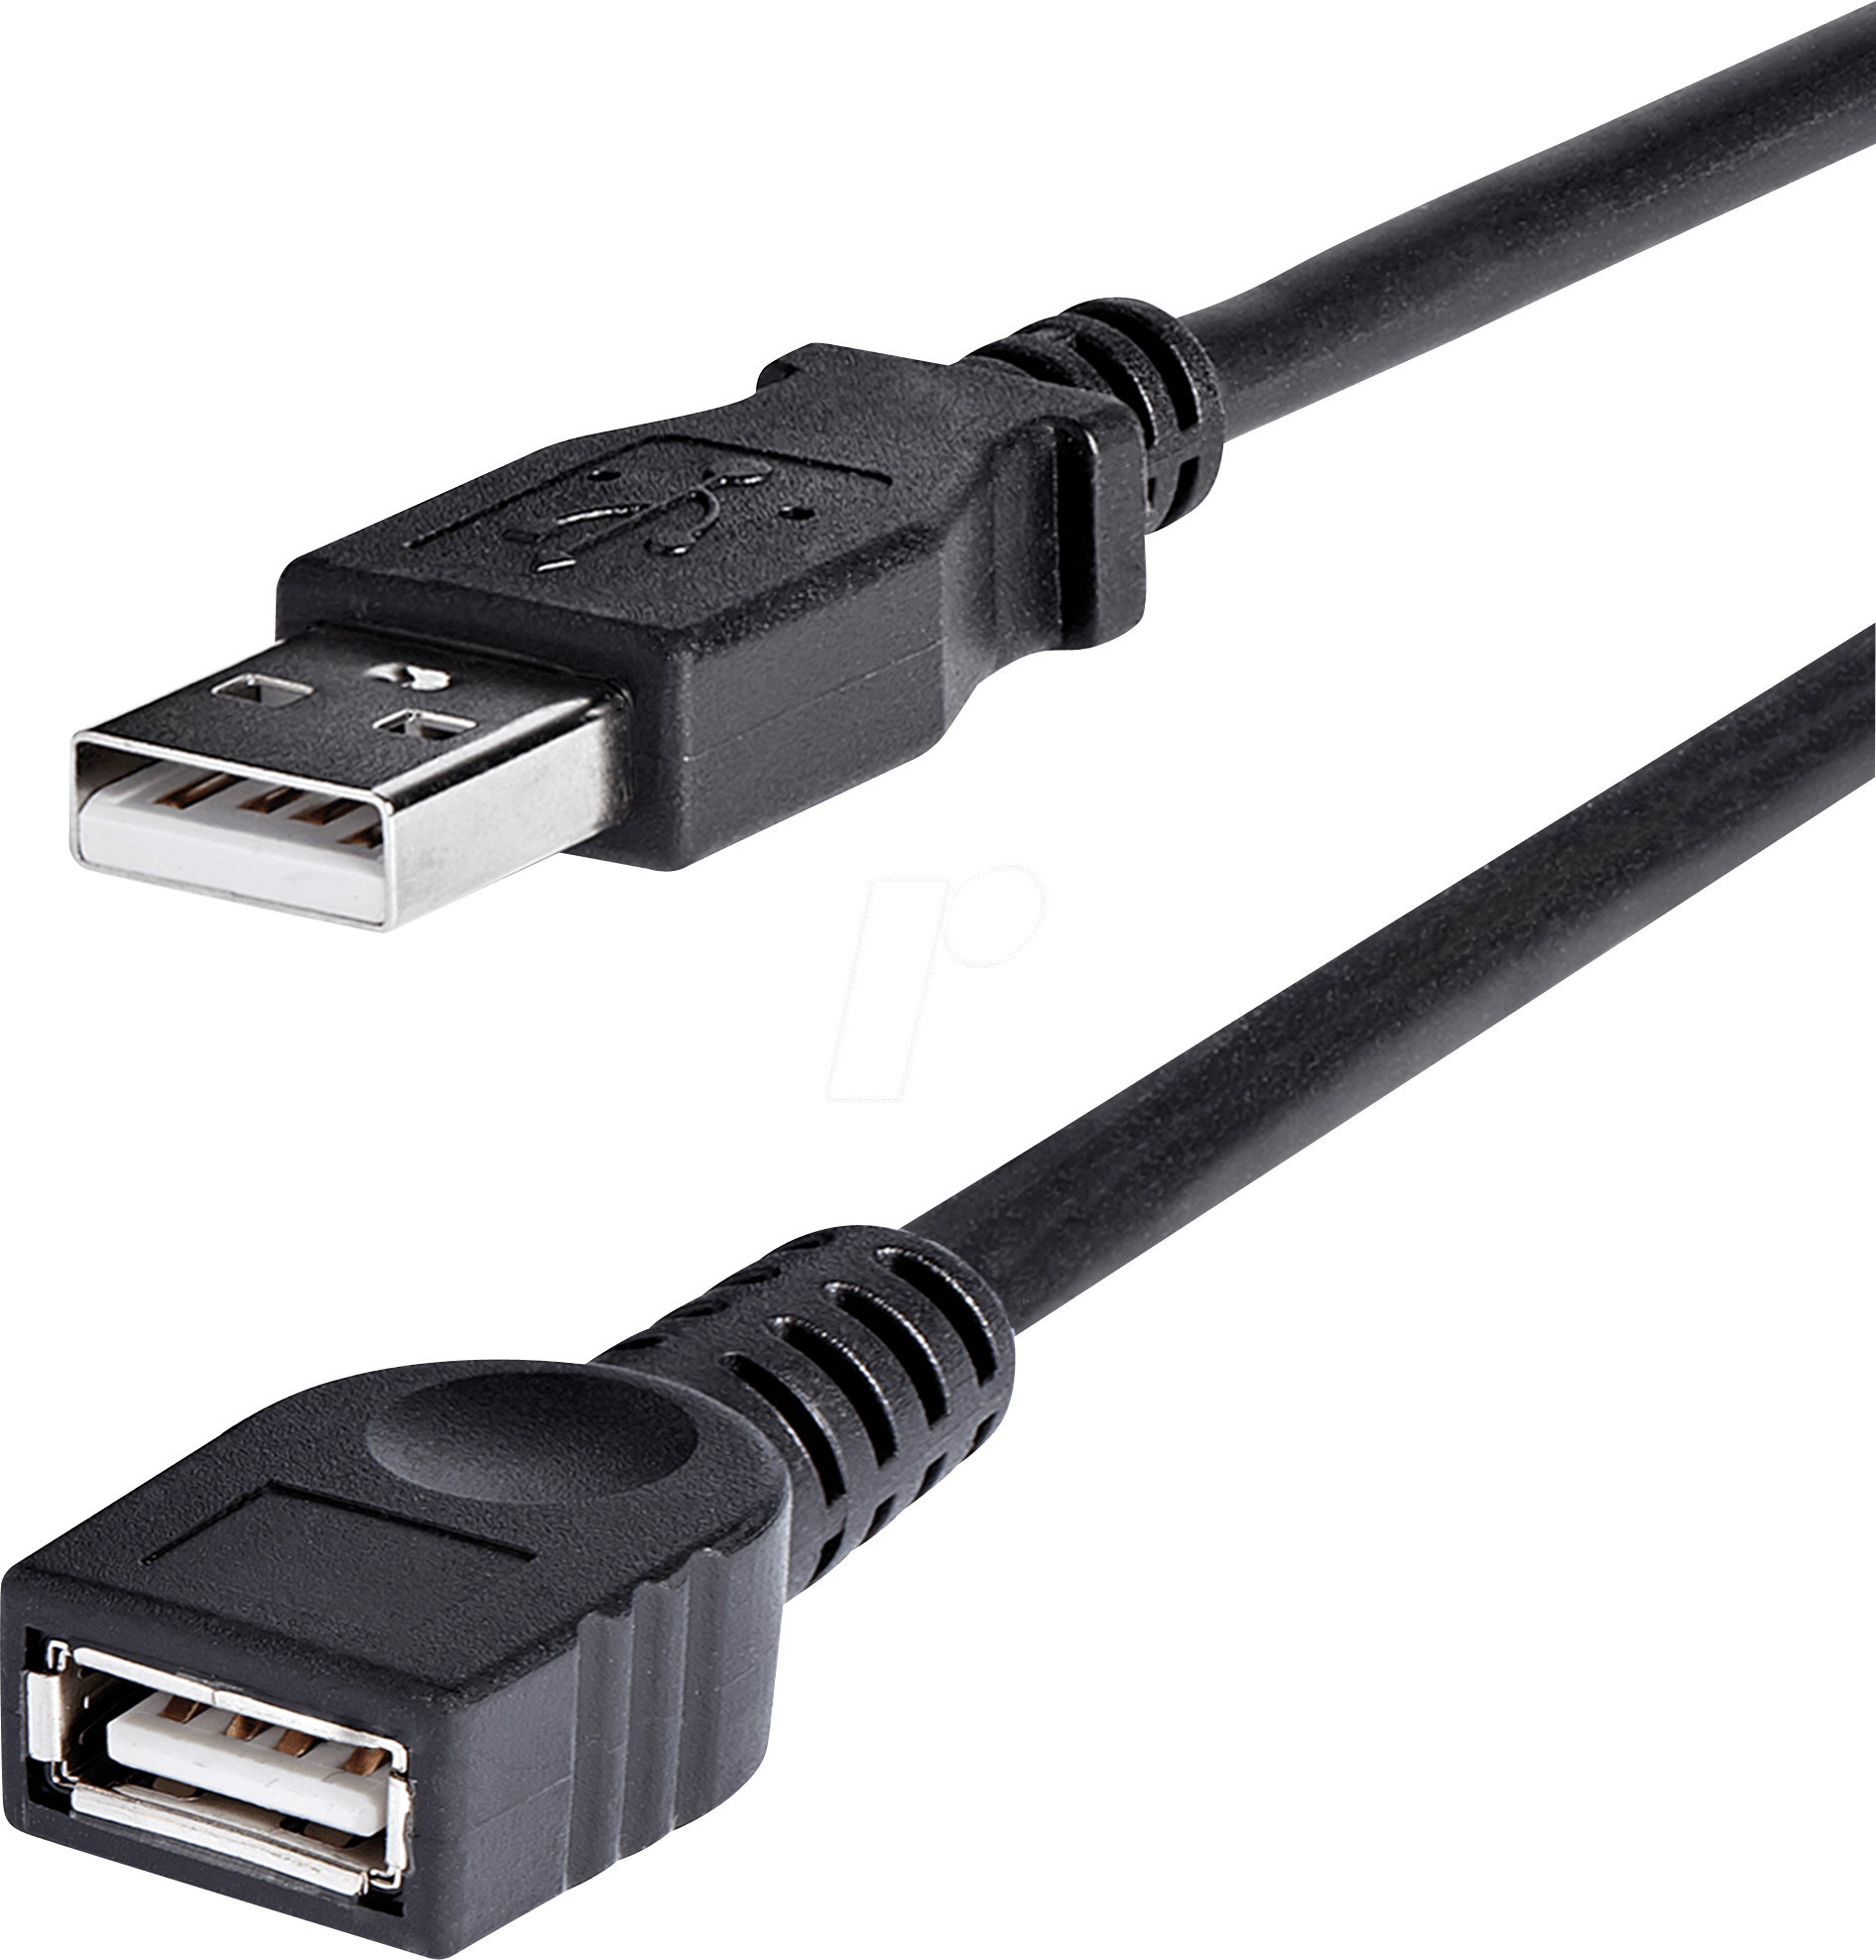 USB Extension 2.0 A to A Male Female Extension Cable Cord charger data L Nq 